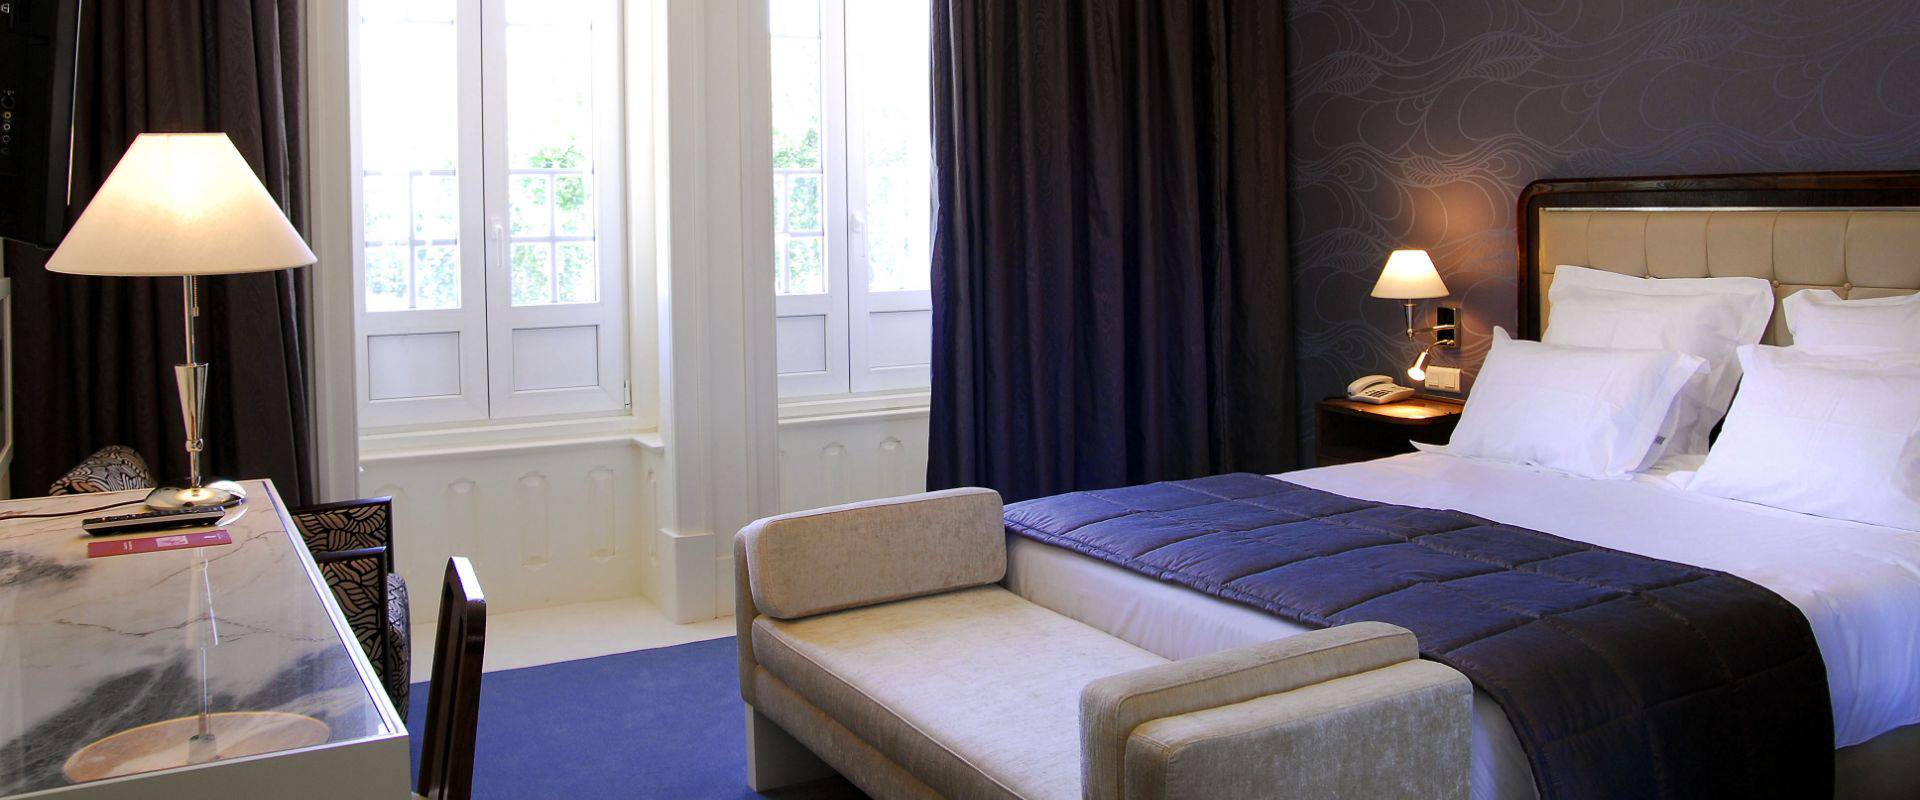 Classic room with two individual beds and exterior view  Curia Palace Hotel Coimbra